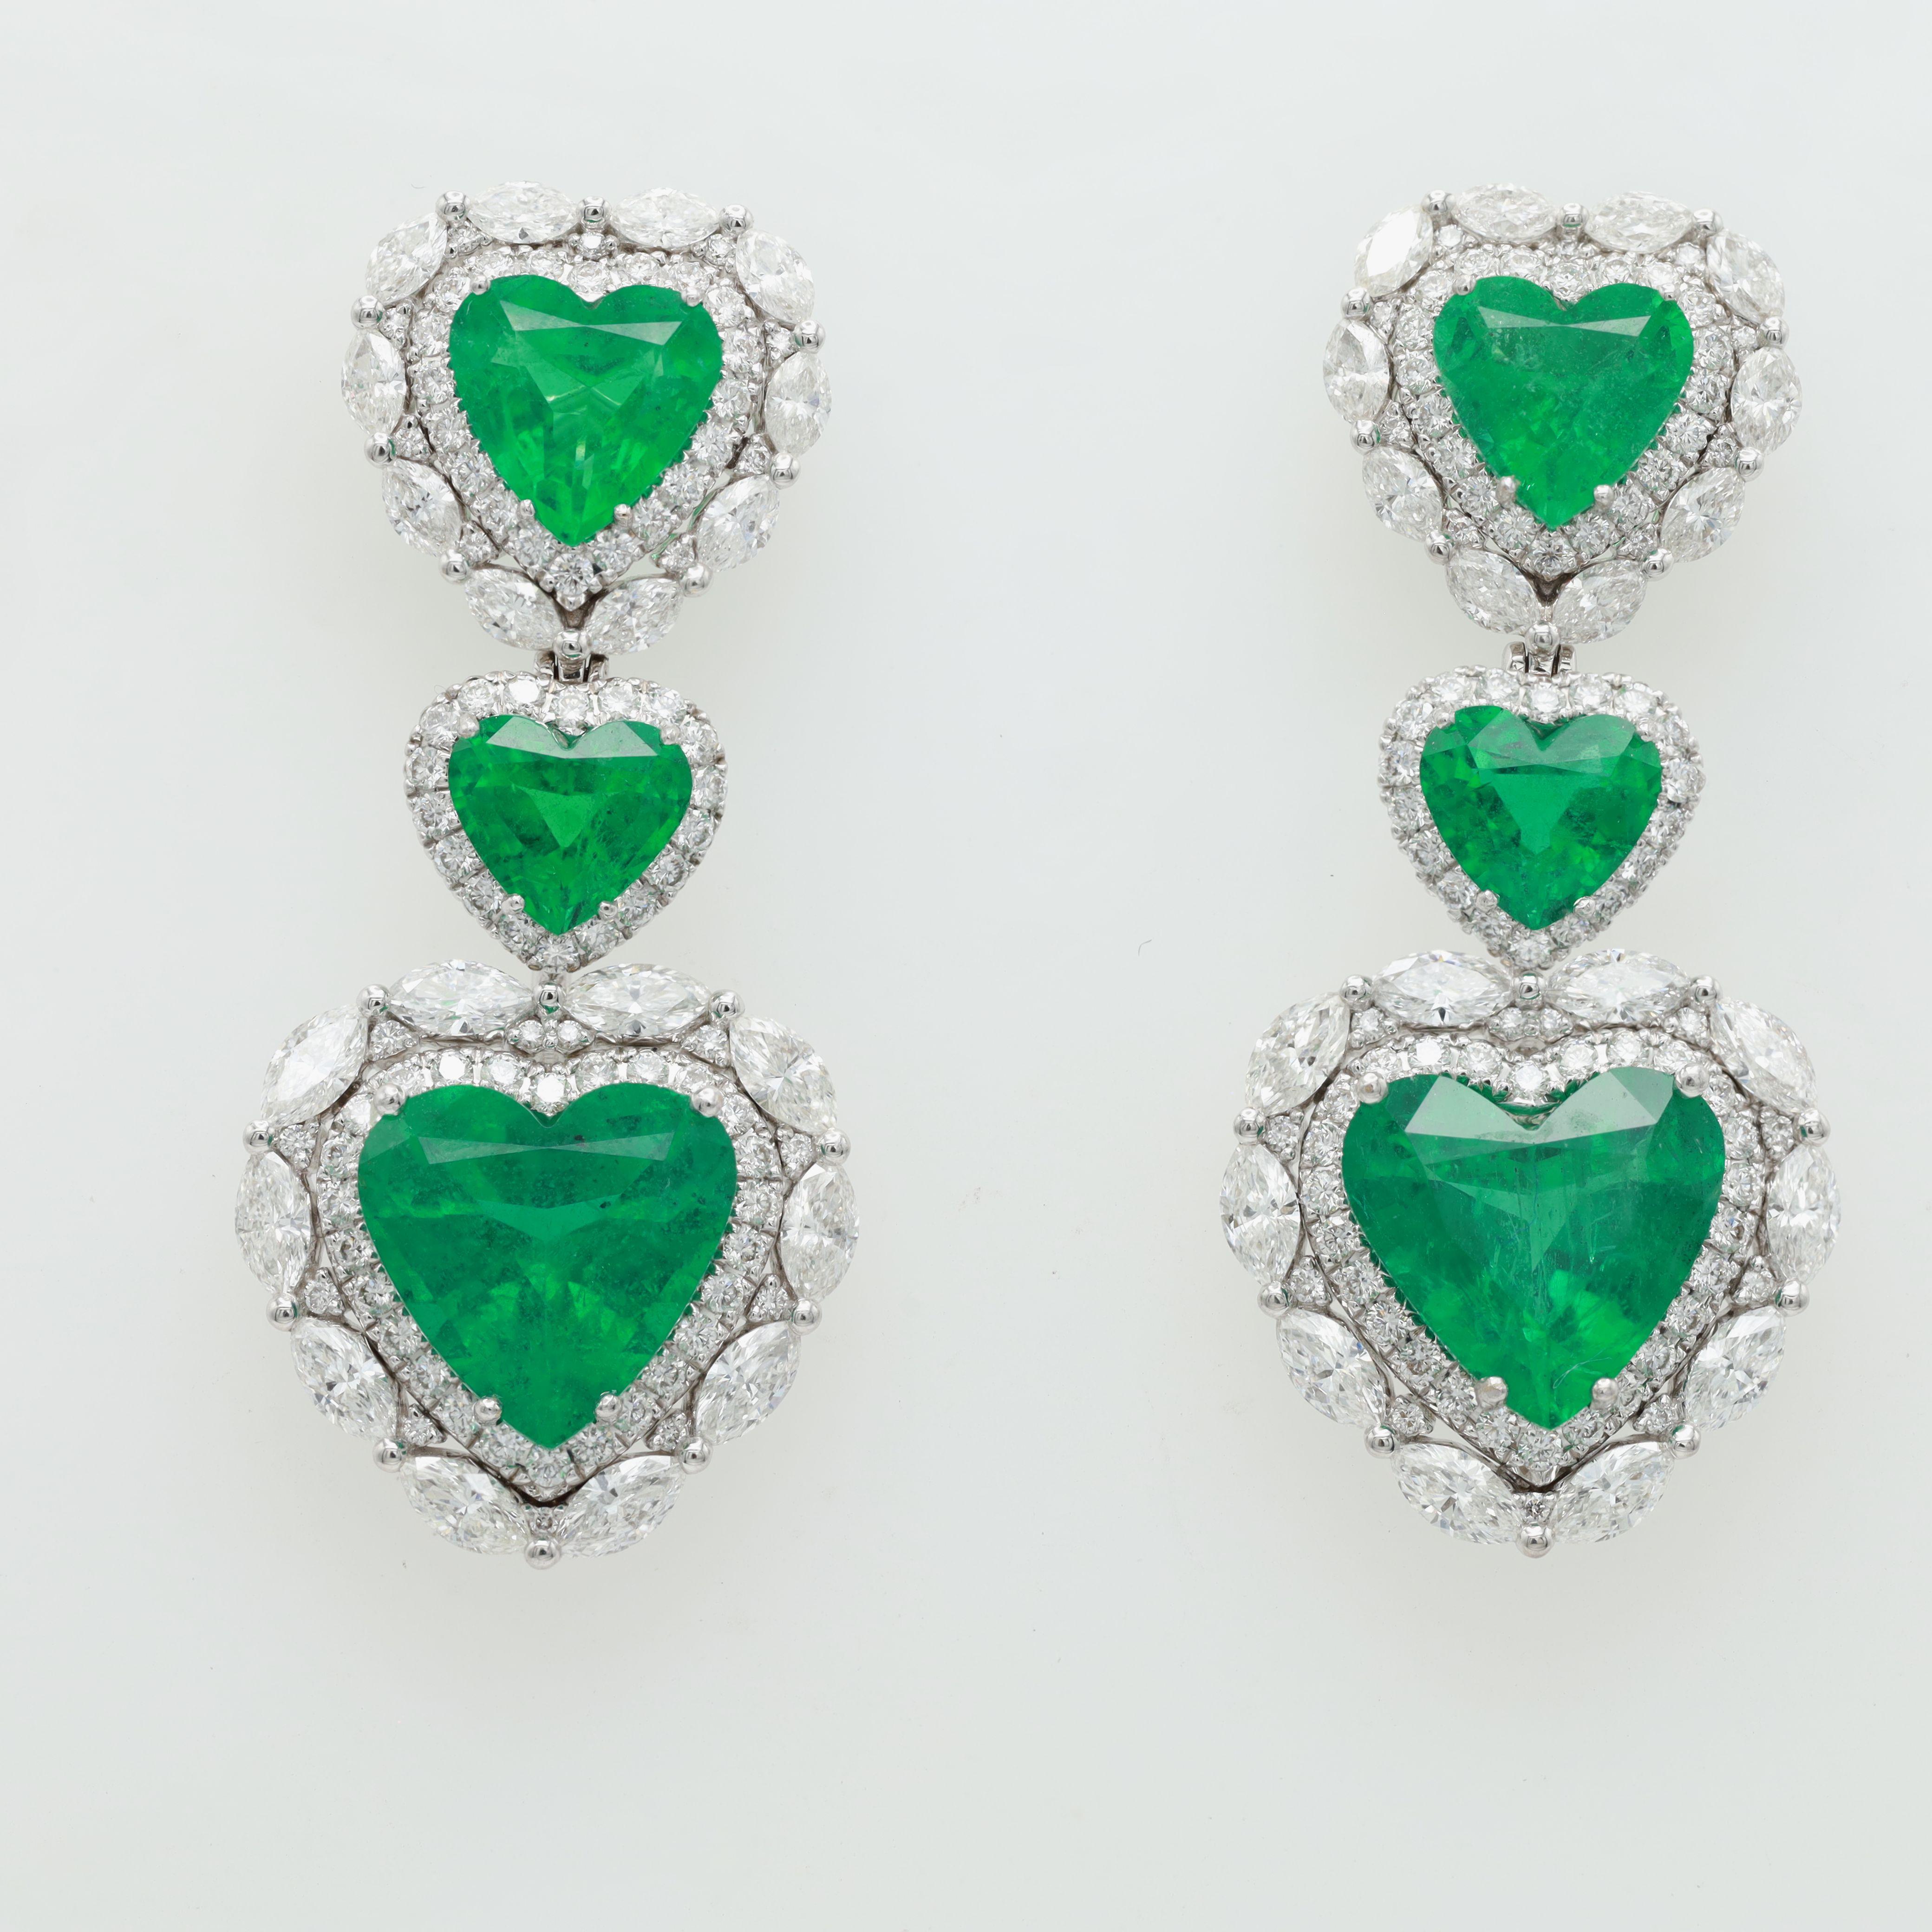 18 kt white gold stud earrings featuring 7.75 cts tw heart shaped emeralds surrounded by 3.77 cts tw of diamonds (C.Dunaigre certified)
Diana M. is a leading supplier of top-quality fine jewelry for over 35 years.
Diana M is one-stop shop for all